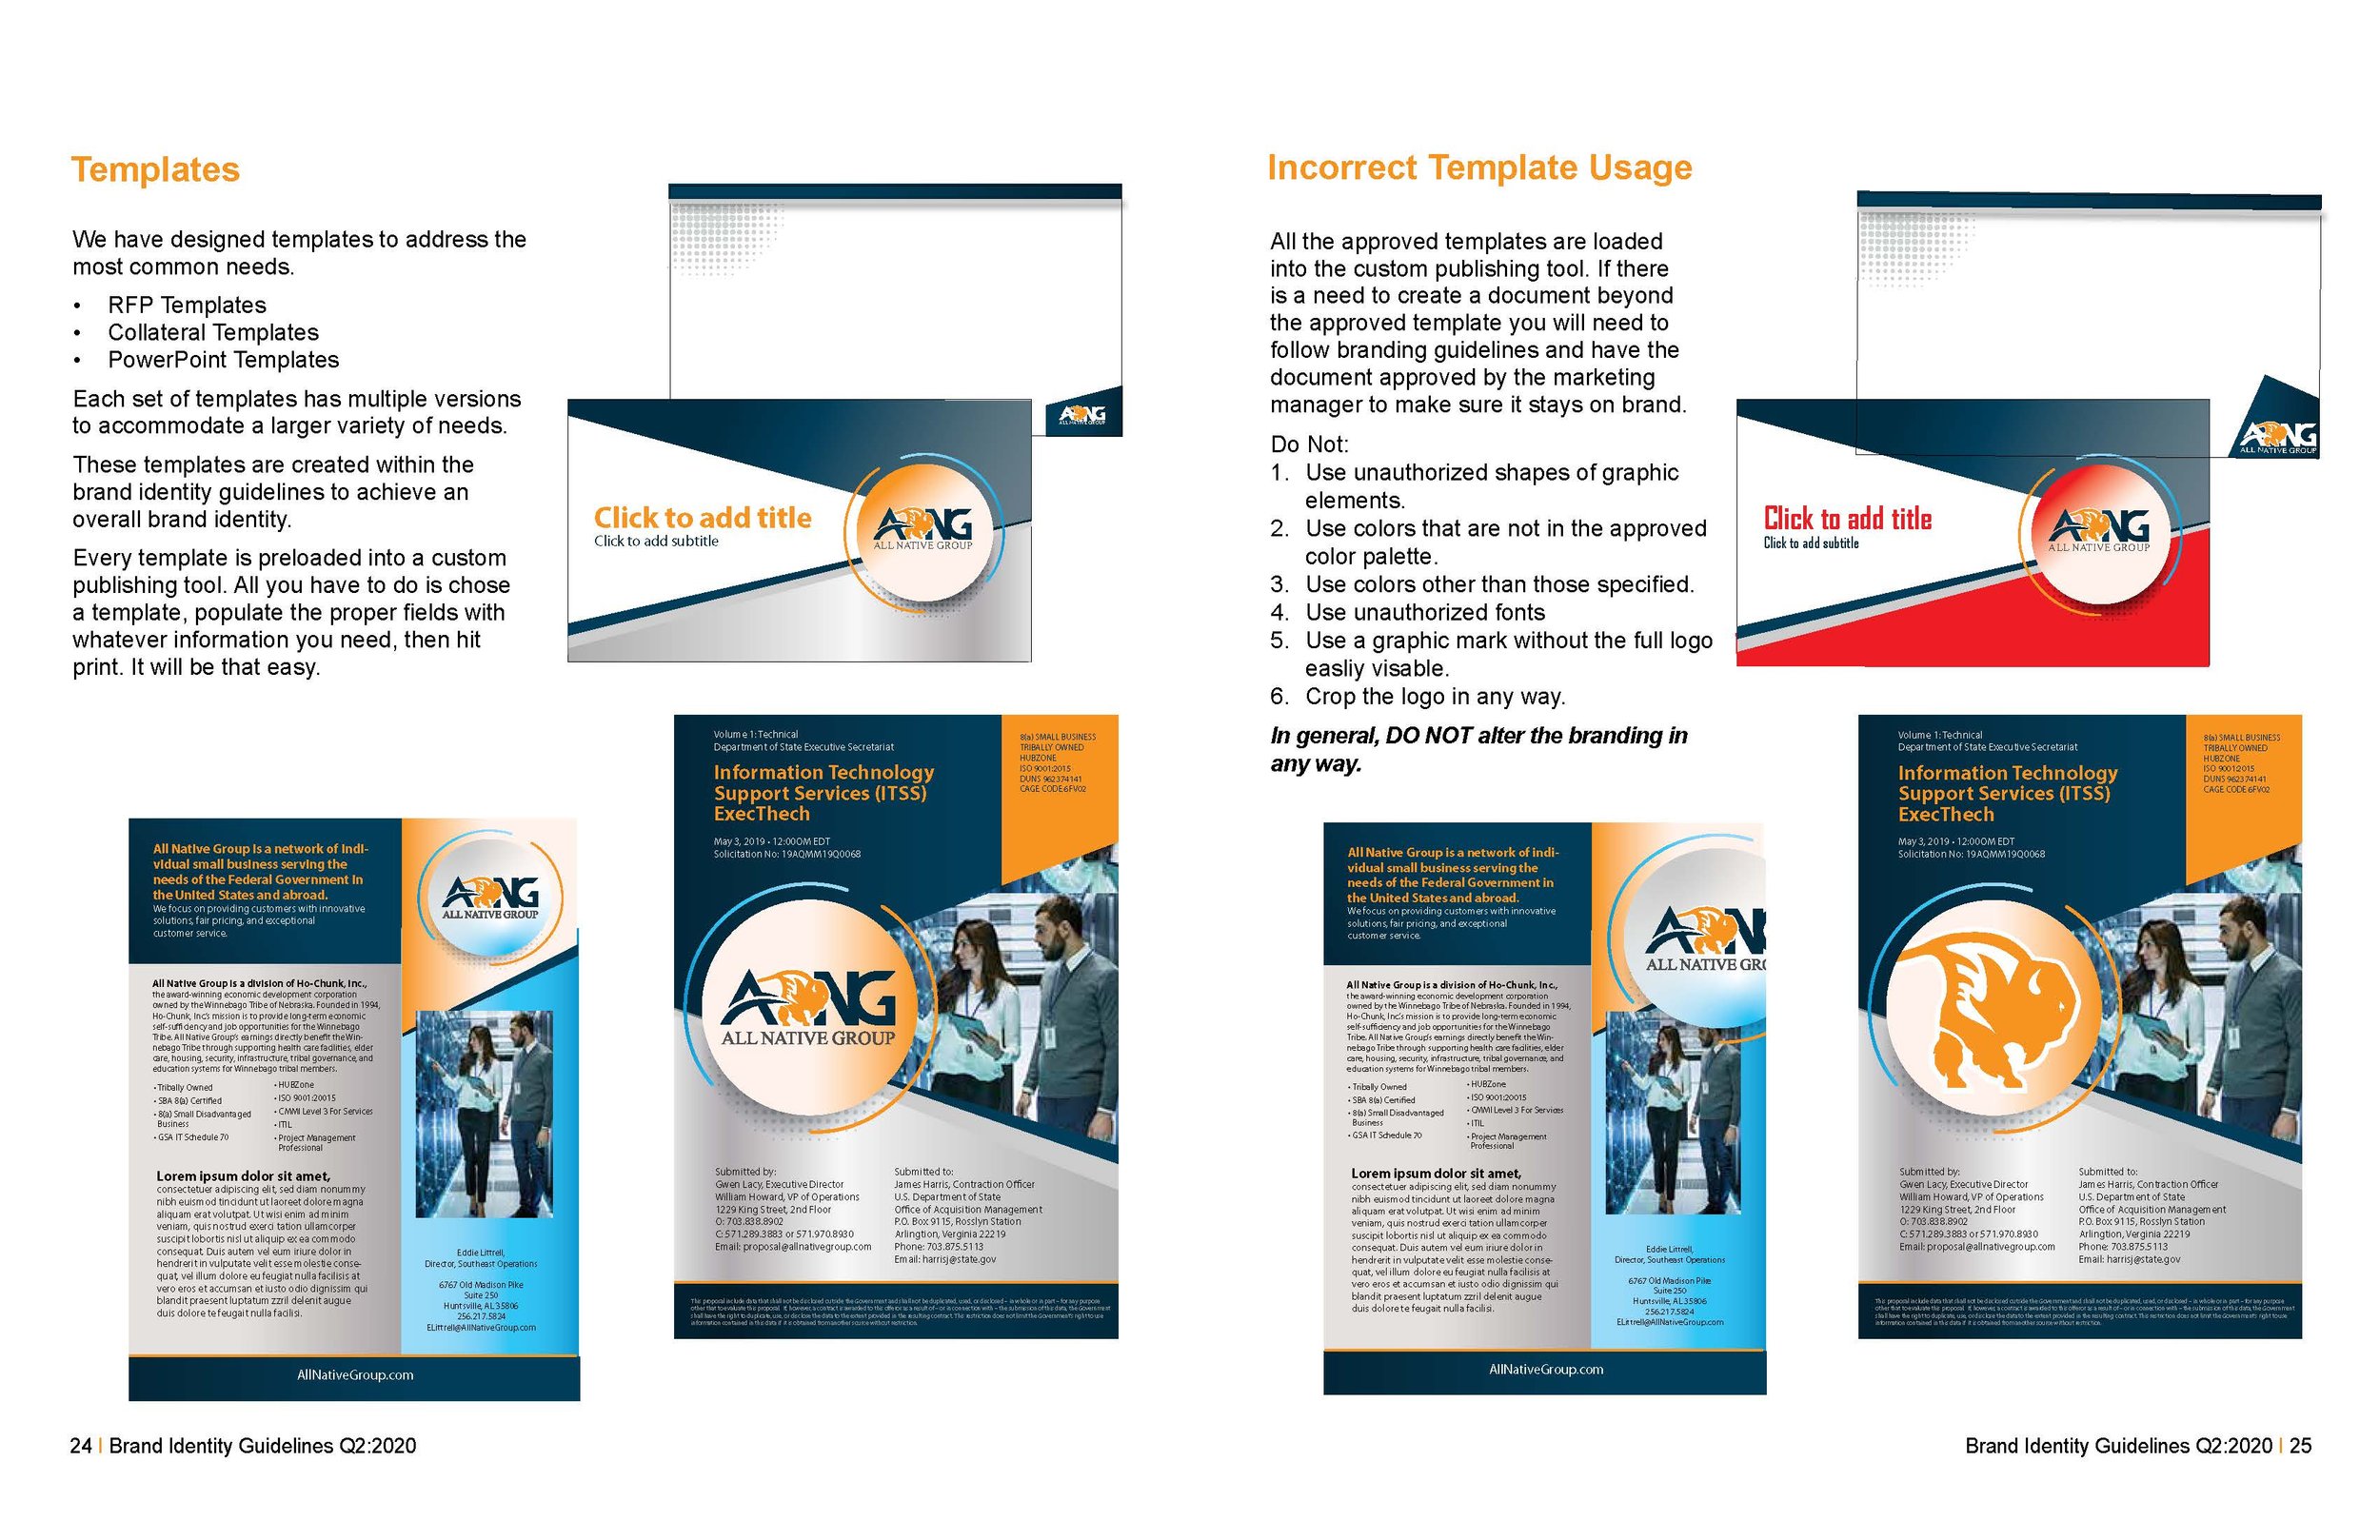 ANG Brand Identity Branding Guidelines_2pg spreads_Page_13.jpg